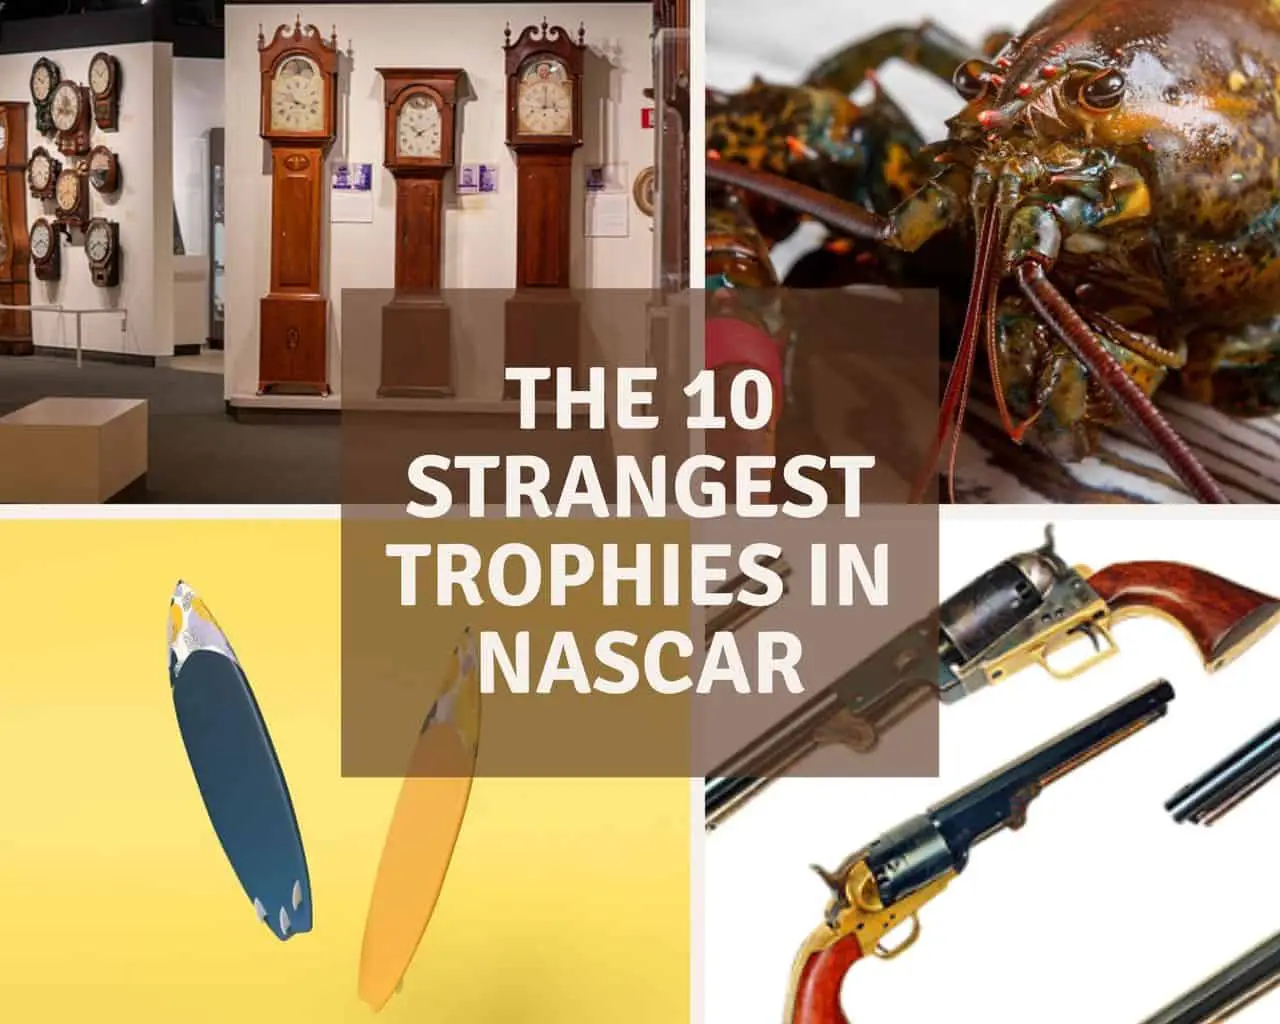 The 10 Strangest Trophies In NASCAR